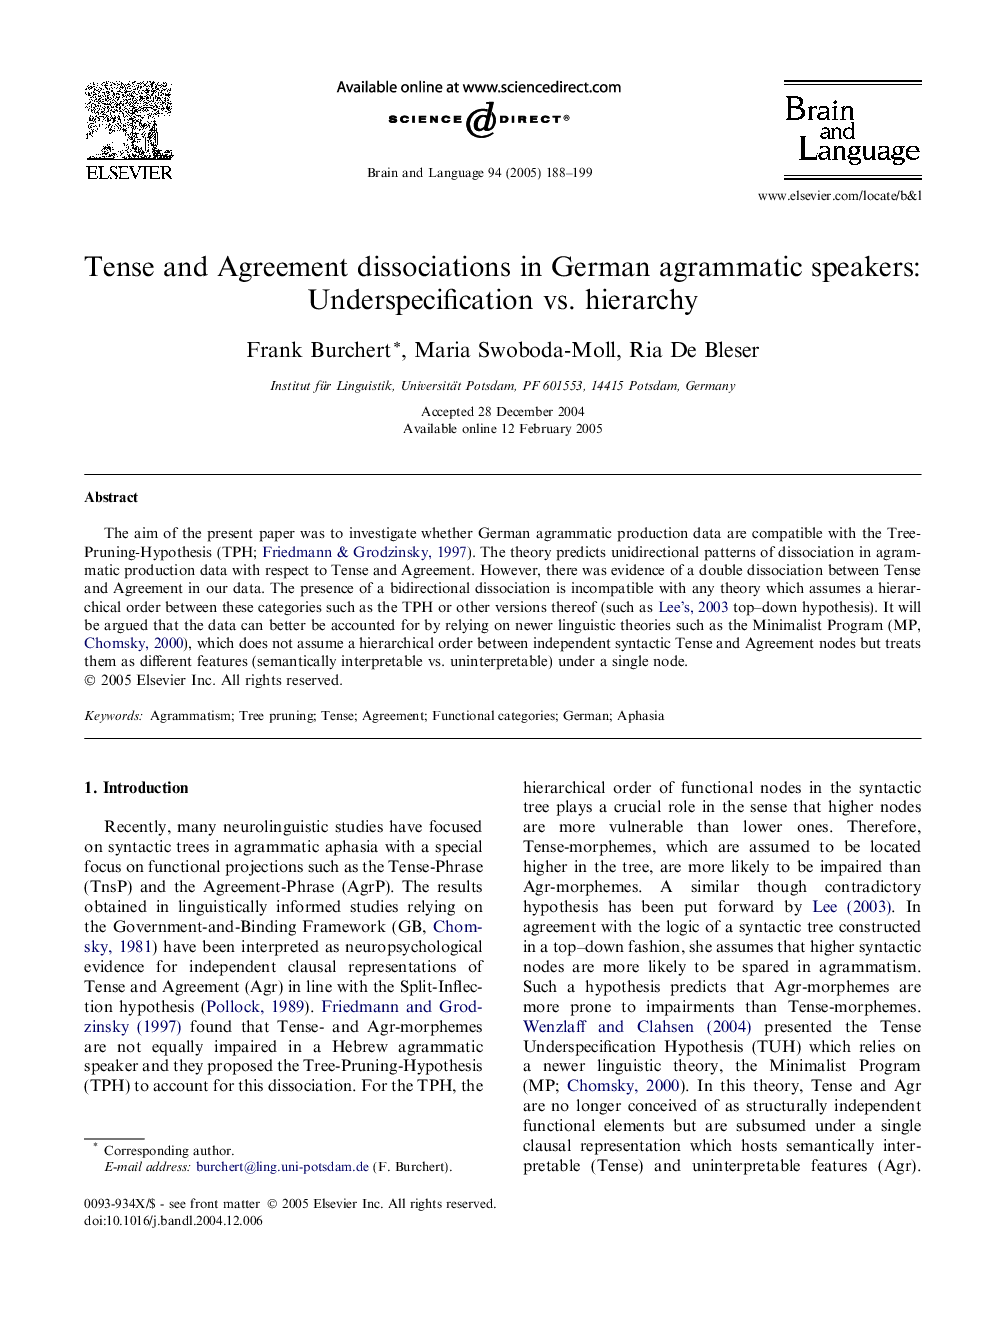 Tense and Agreement dissociations in German agrammatic speakers: Underspecification vs. hierarchy